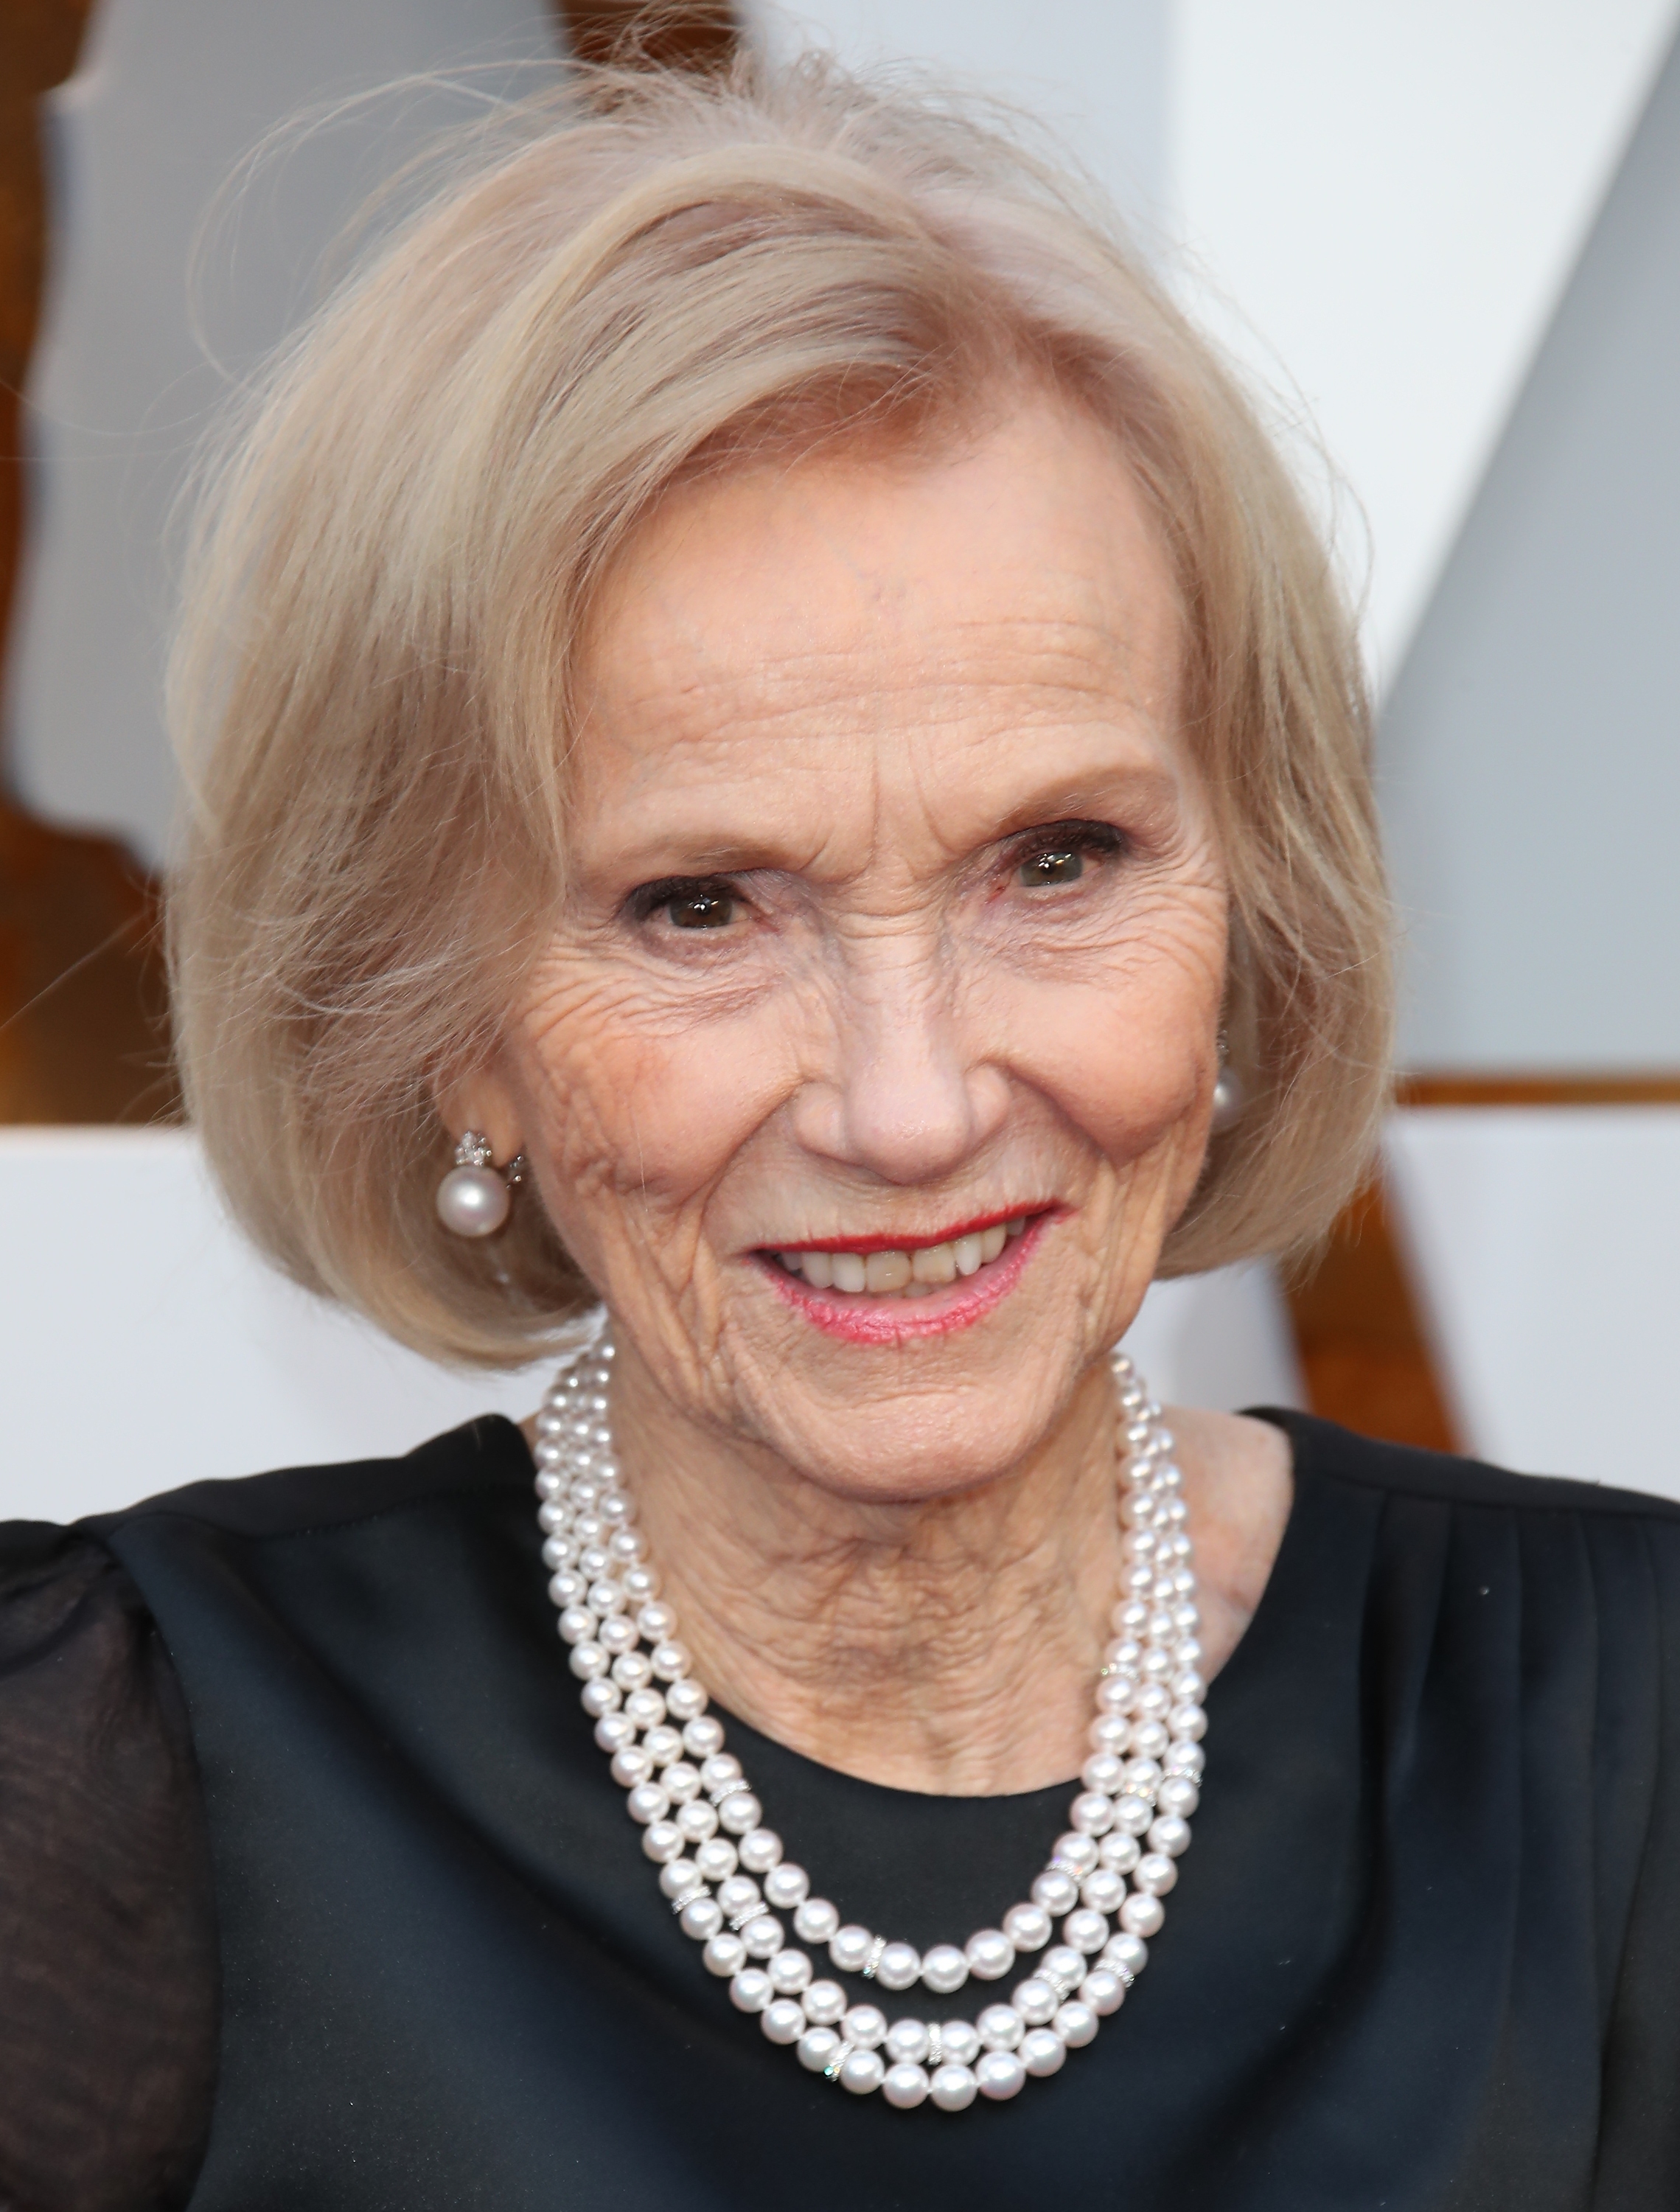 Eva Marie Saint at the 90th Annual Academy Awards in Hollywood, 2018 | Source: Getty Images